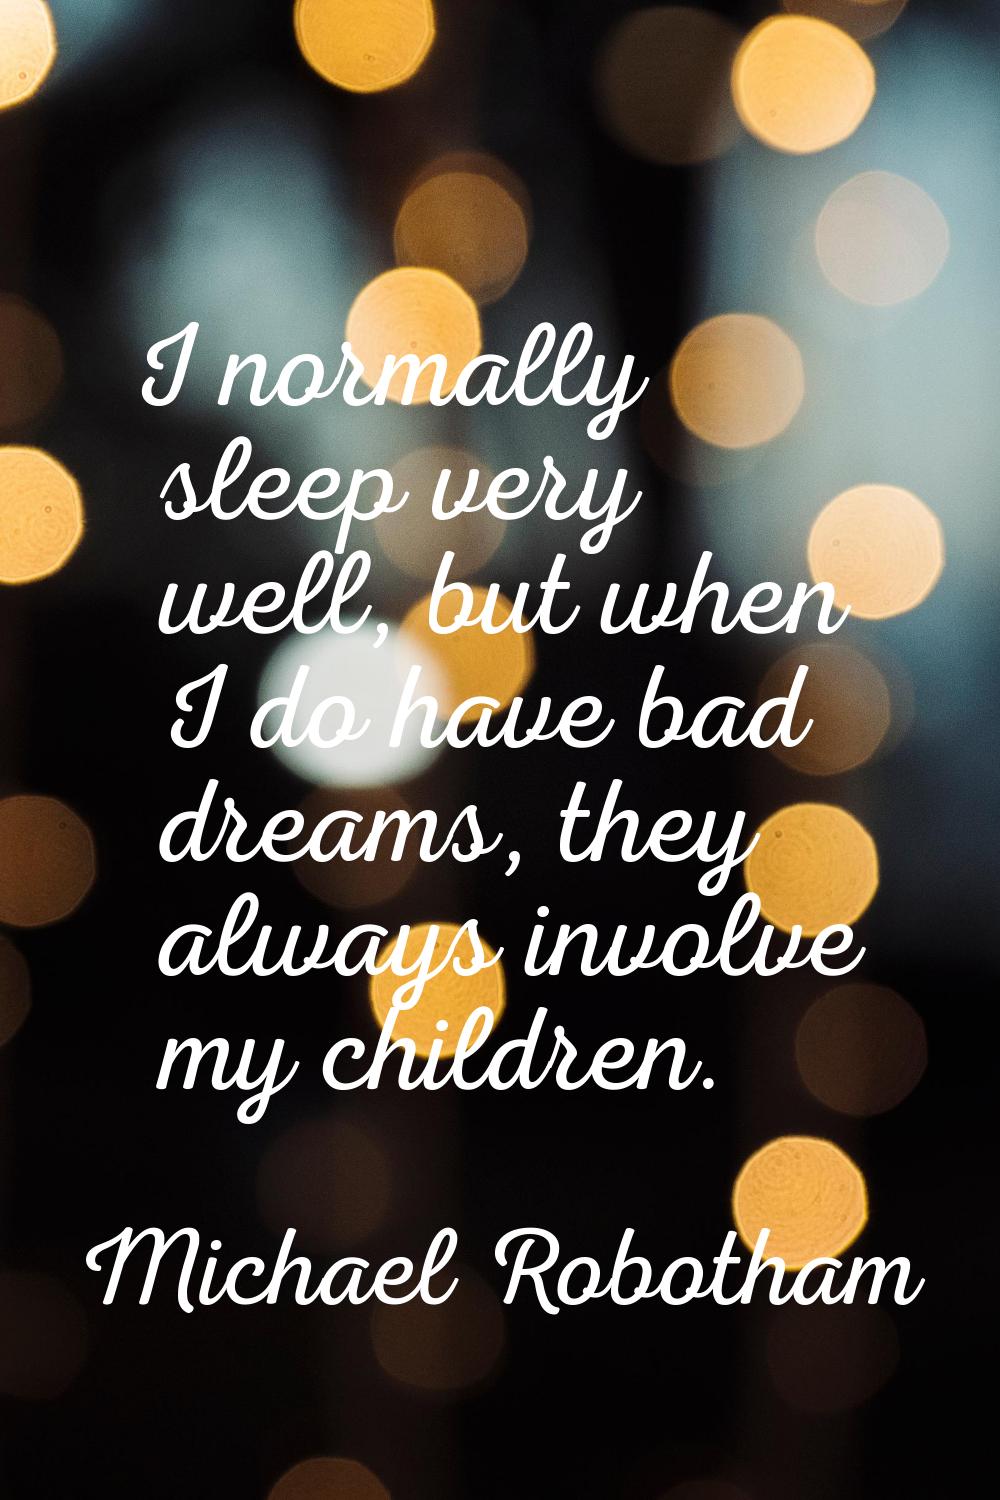 I normally sleep very well, but when I do have bad dreams, they always involve my children.